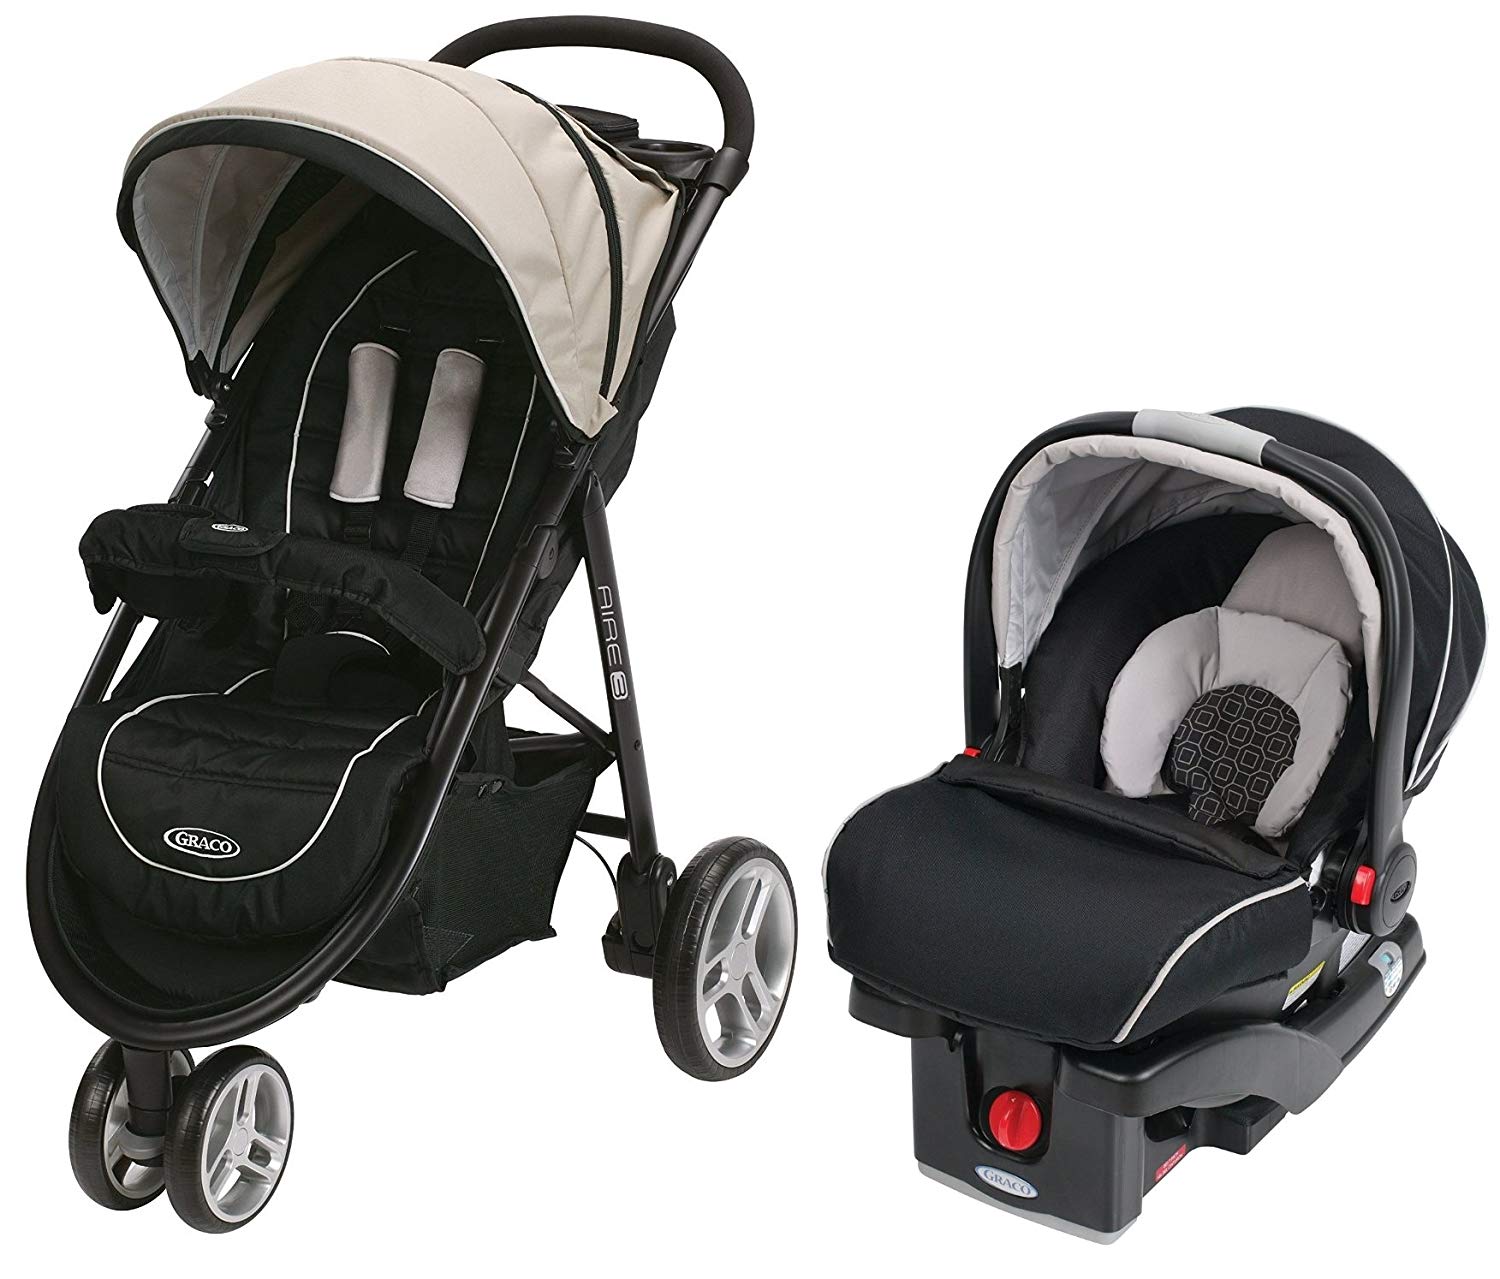 Graco Baby Strollers Size